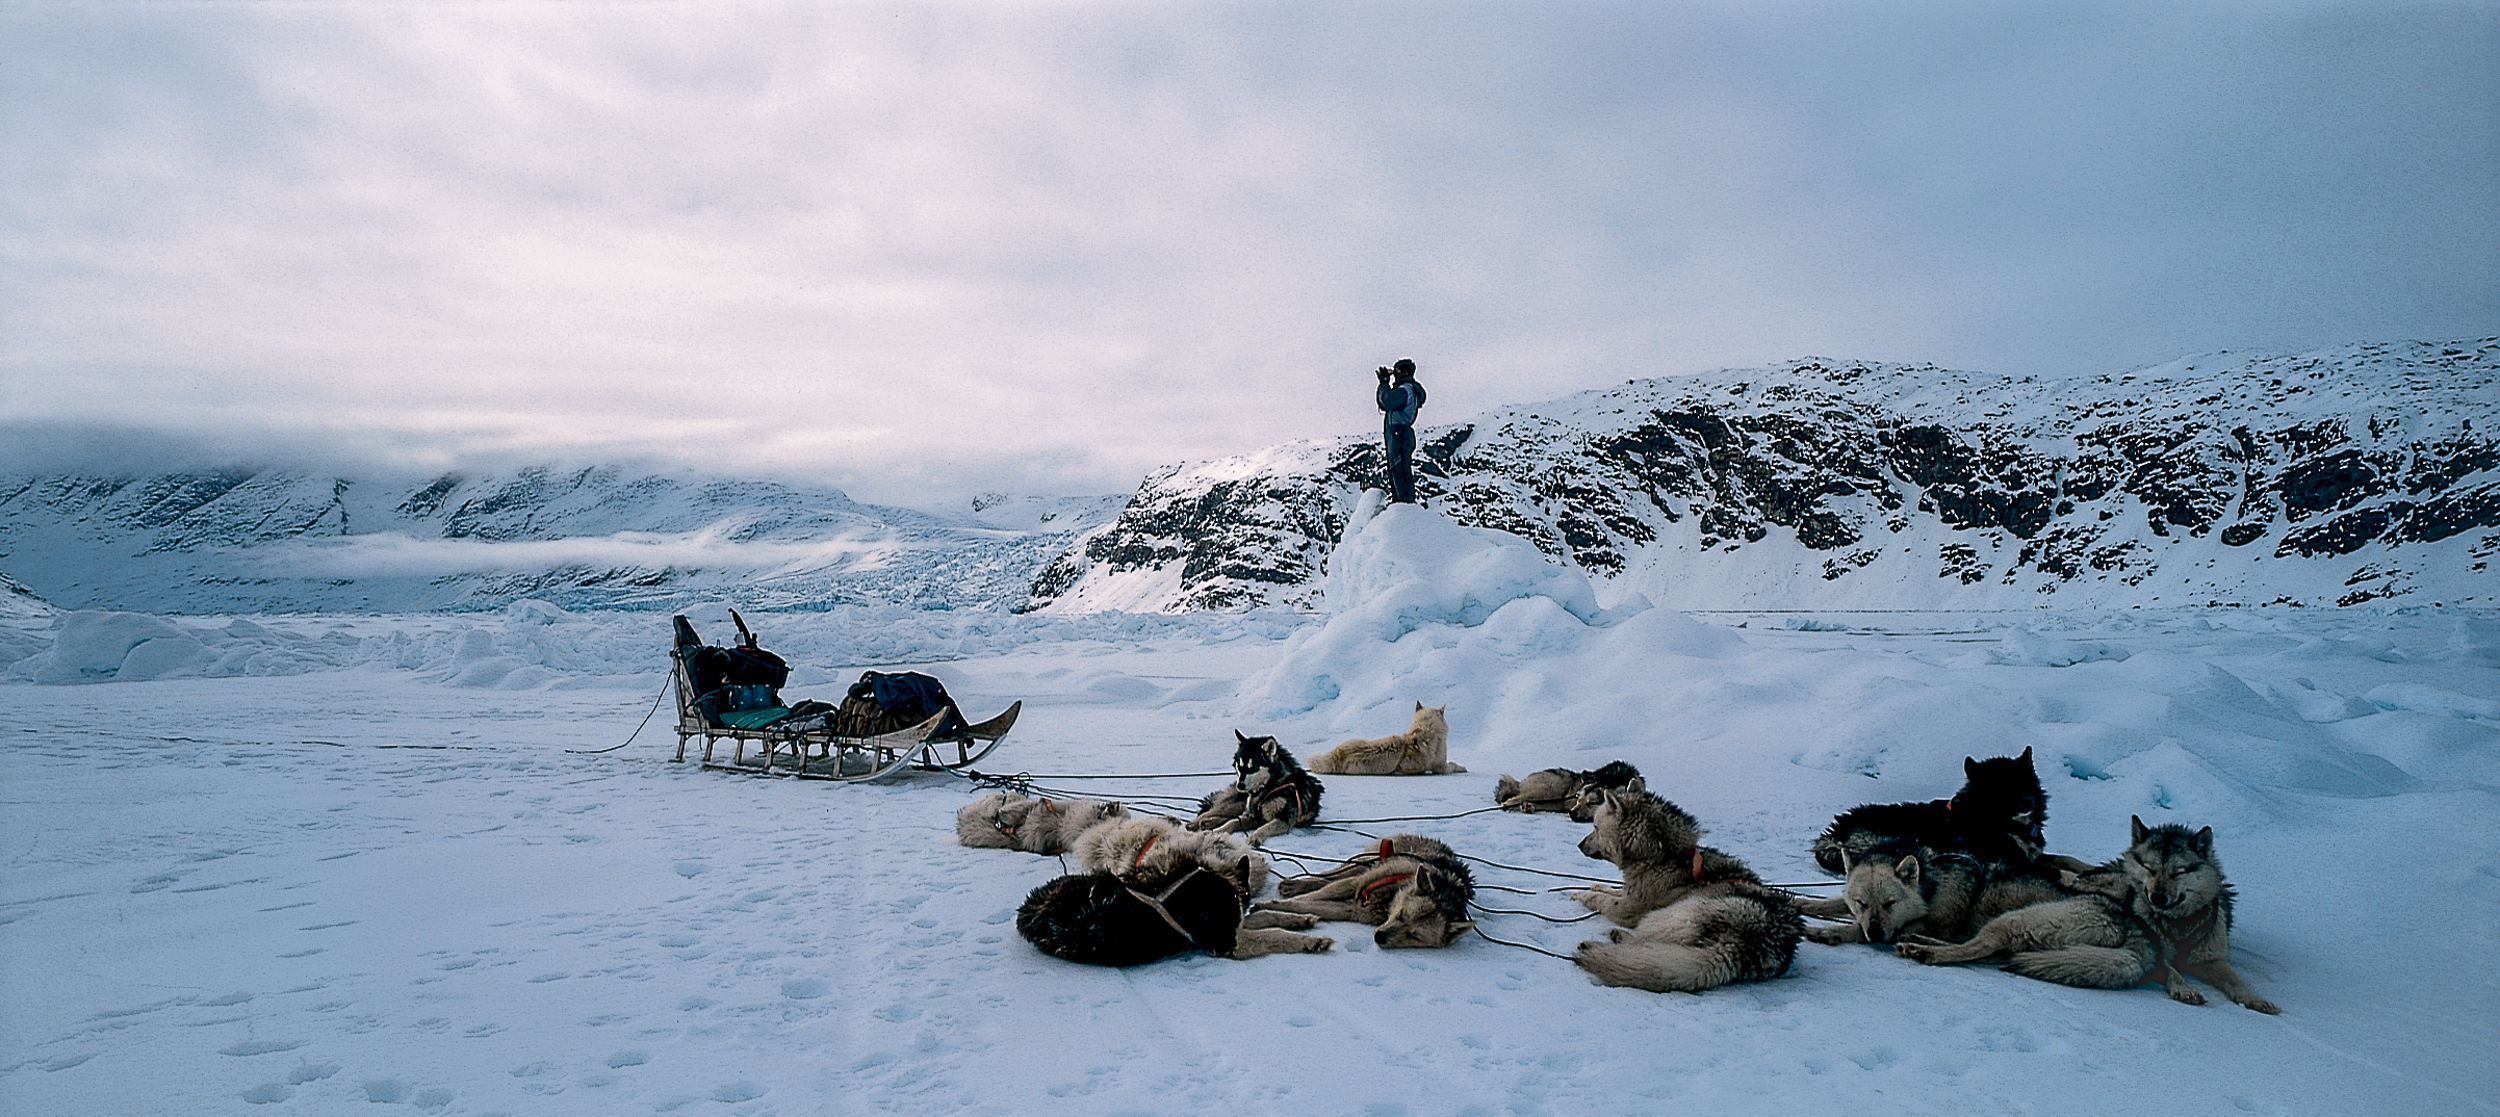 Following the footprints of a polar bear. Ulrik Sanimuinaq with his dogs on sea-ice in arctic wilderness, two days from the nearest habited settlement.  JONAA©Kristjan Fridriksson